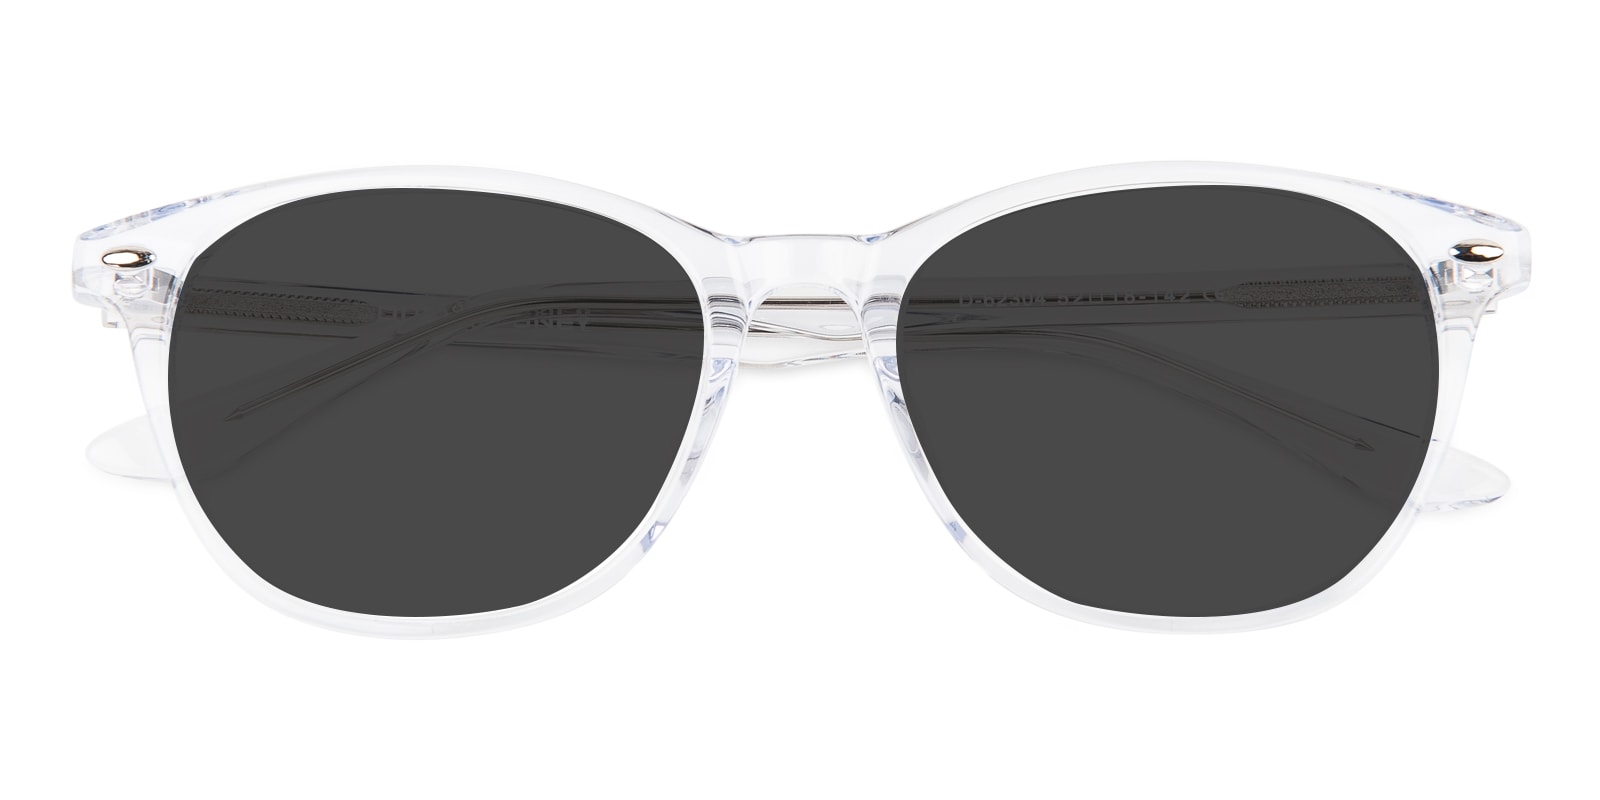 Oval,Classic Wayframe Sunglasses, Full Frame Crystal Plastic - SUP0797